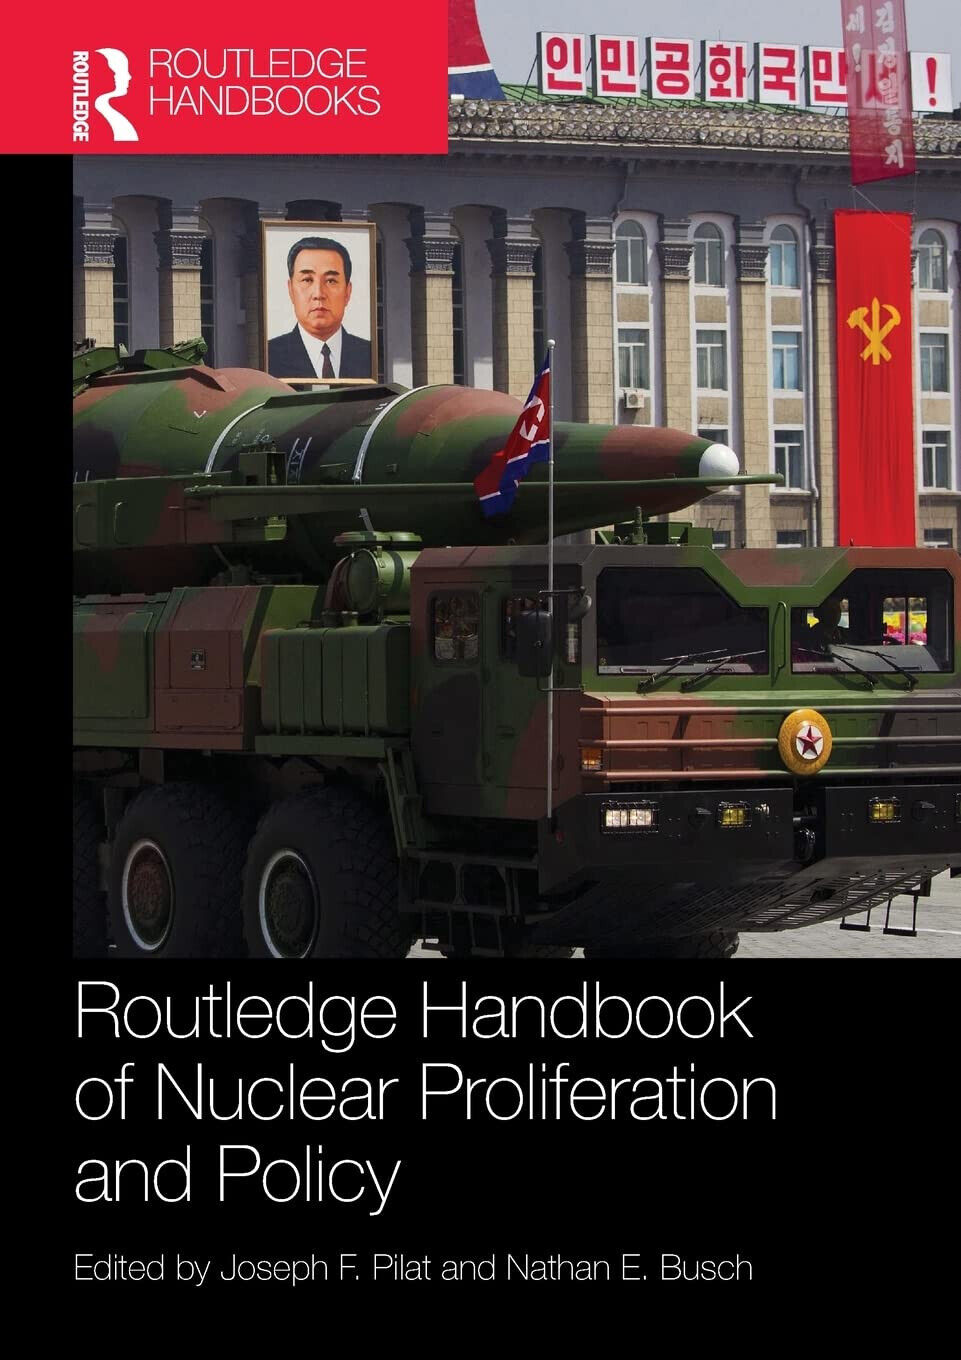 Routledge Handbook of Nuclear Proliferation and Policy - Joseph F. Pilat - 2017